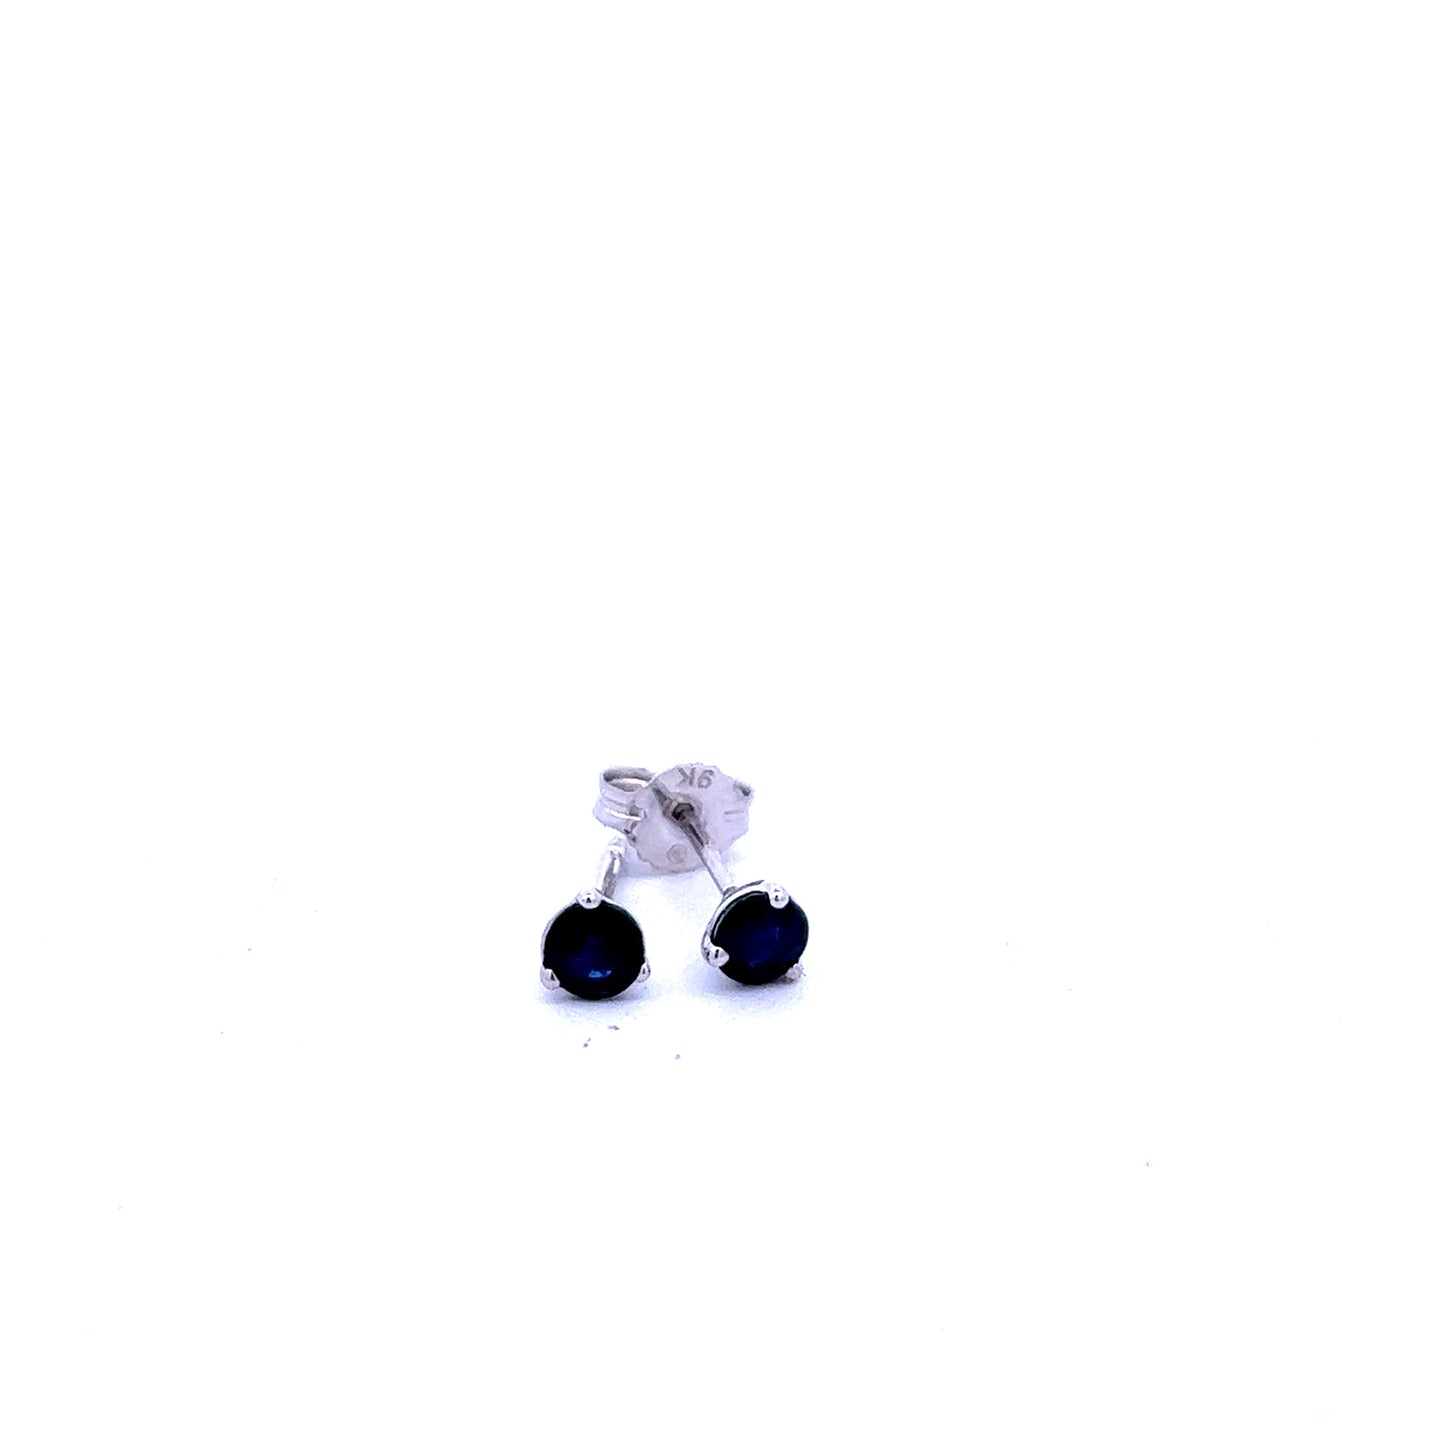 9ct White Gold Sapphire 4mm 3 Claw Stud Earrings